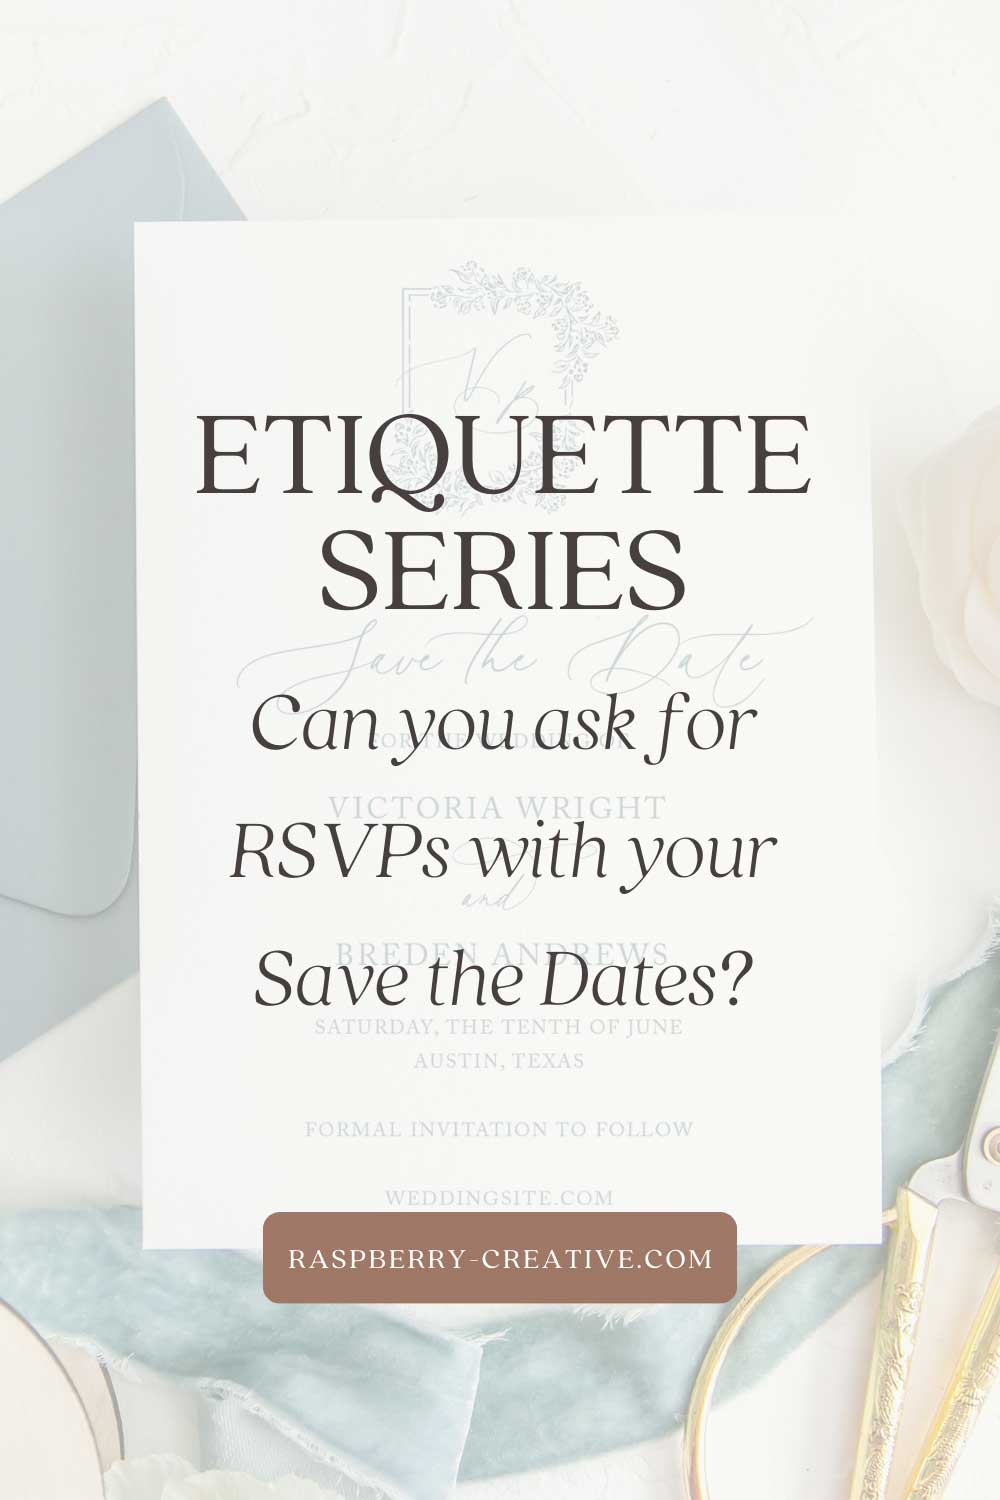 etiquette series can you send rsvps with your save the dates?